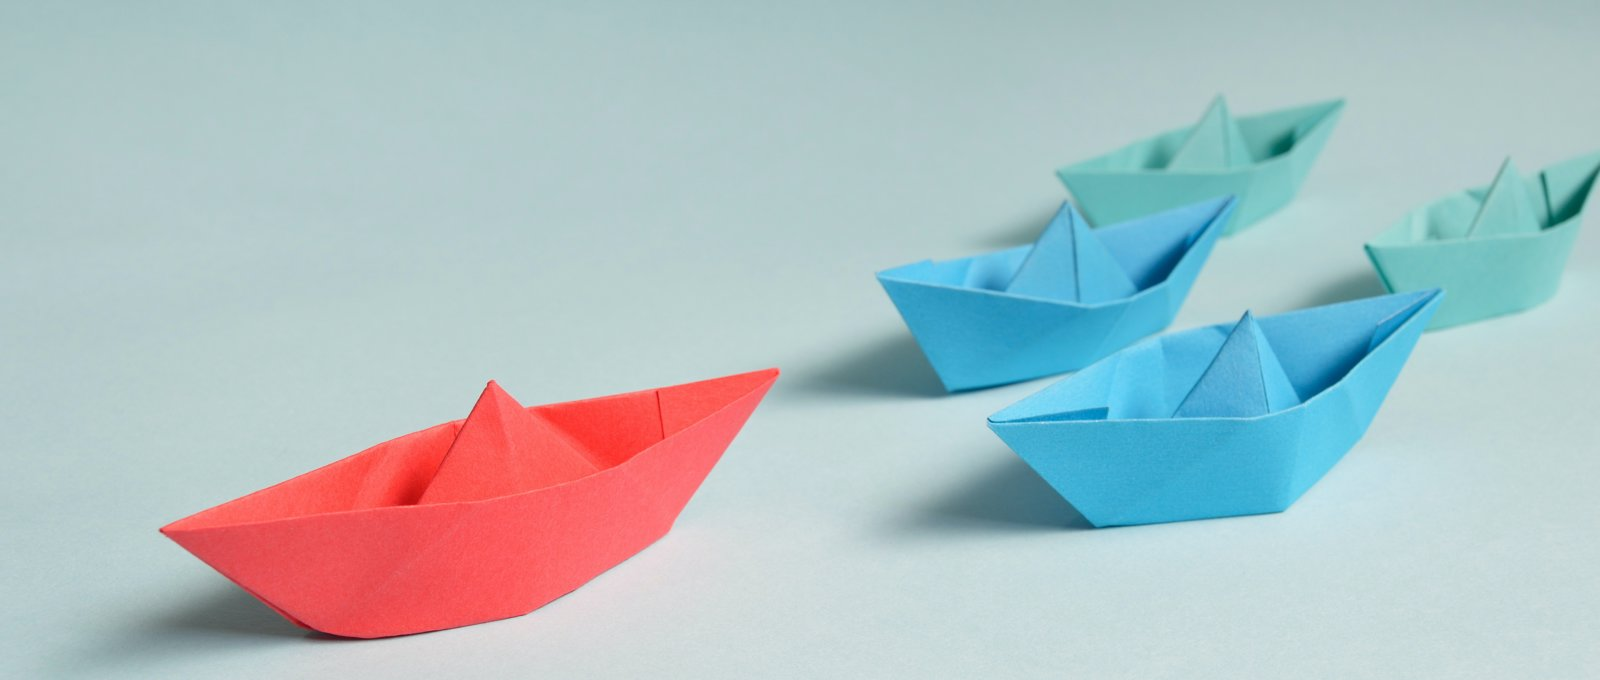 A fleet of paper origami ships